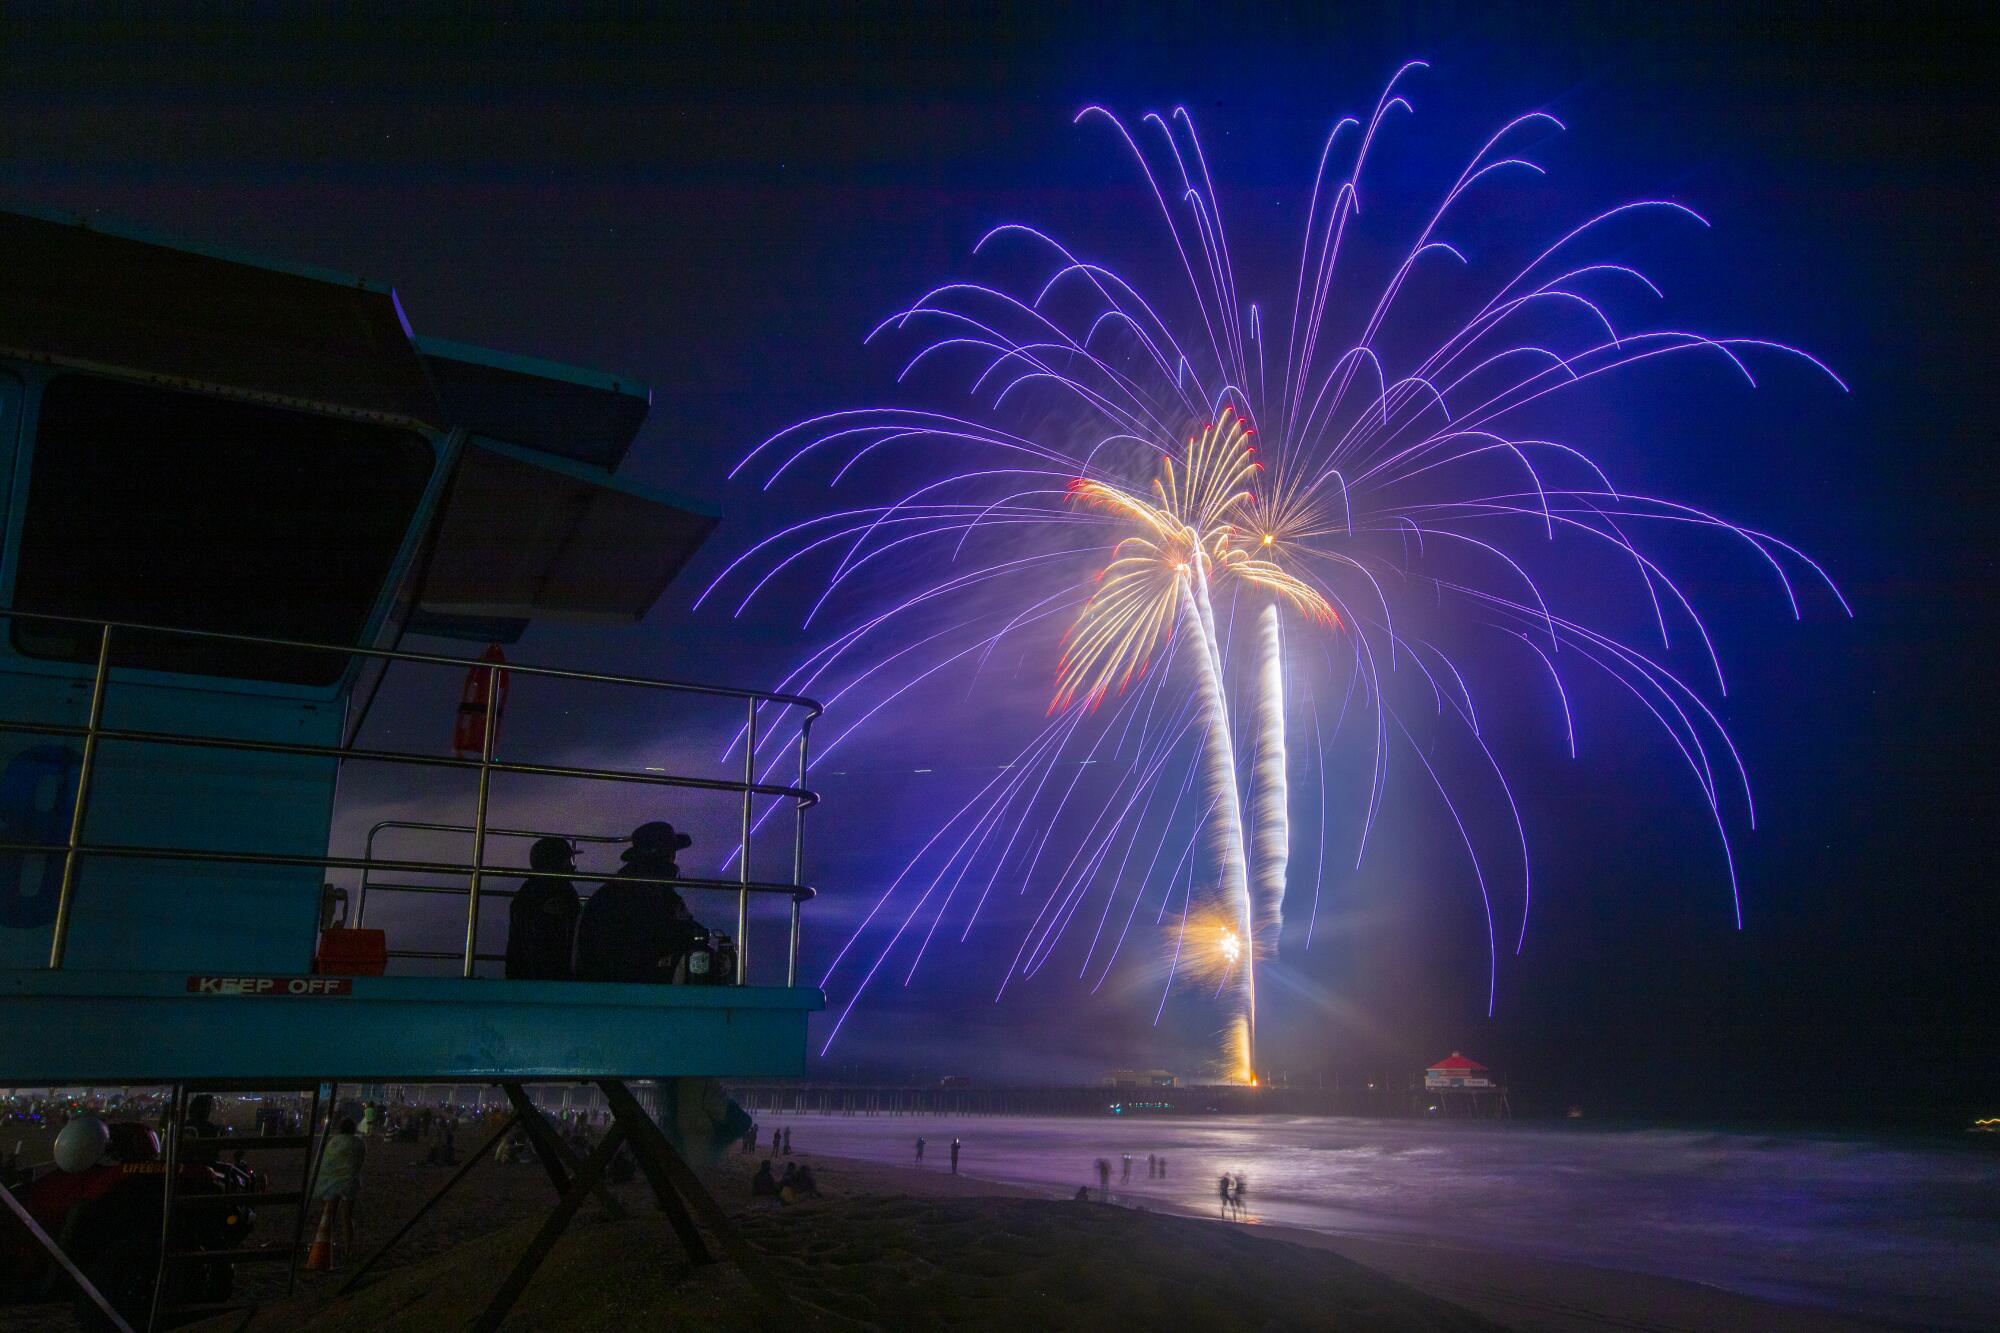 Lifeguards in a tower watch a shower of purple and yellow sparks from fireworks 